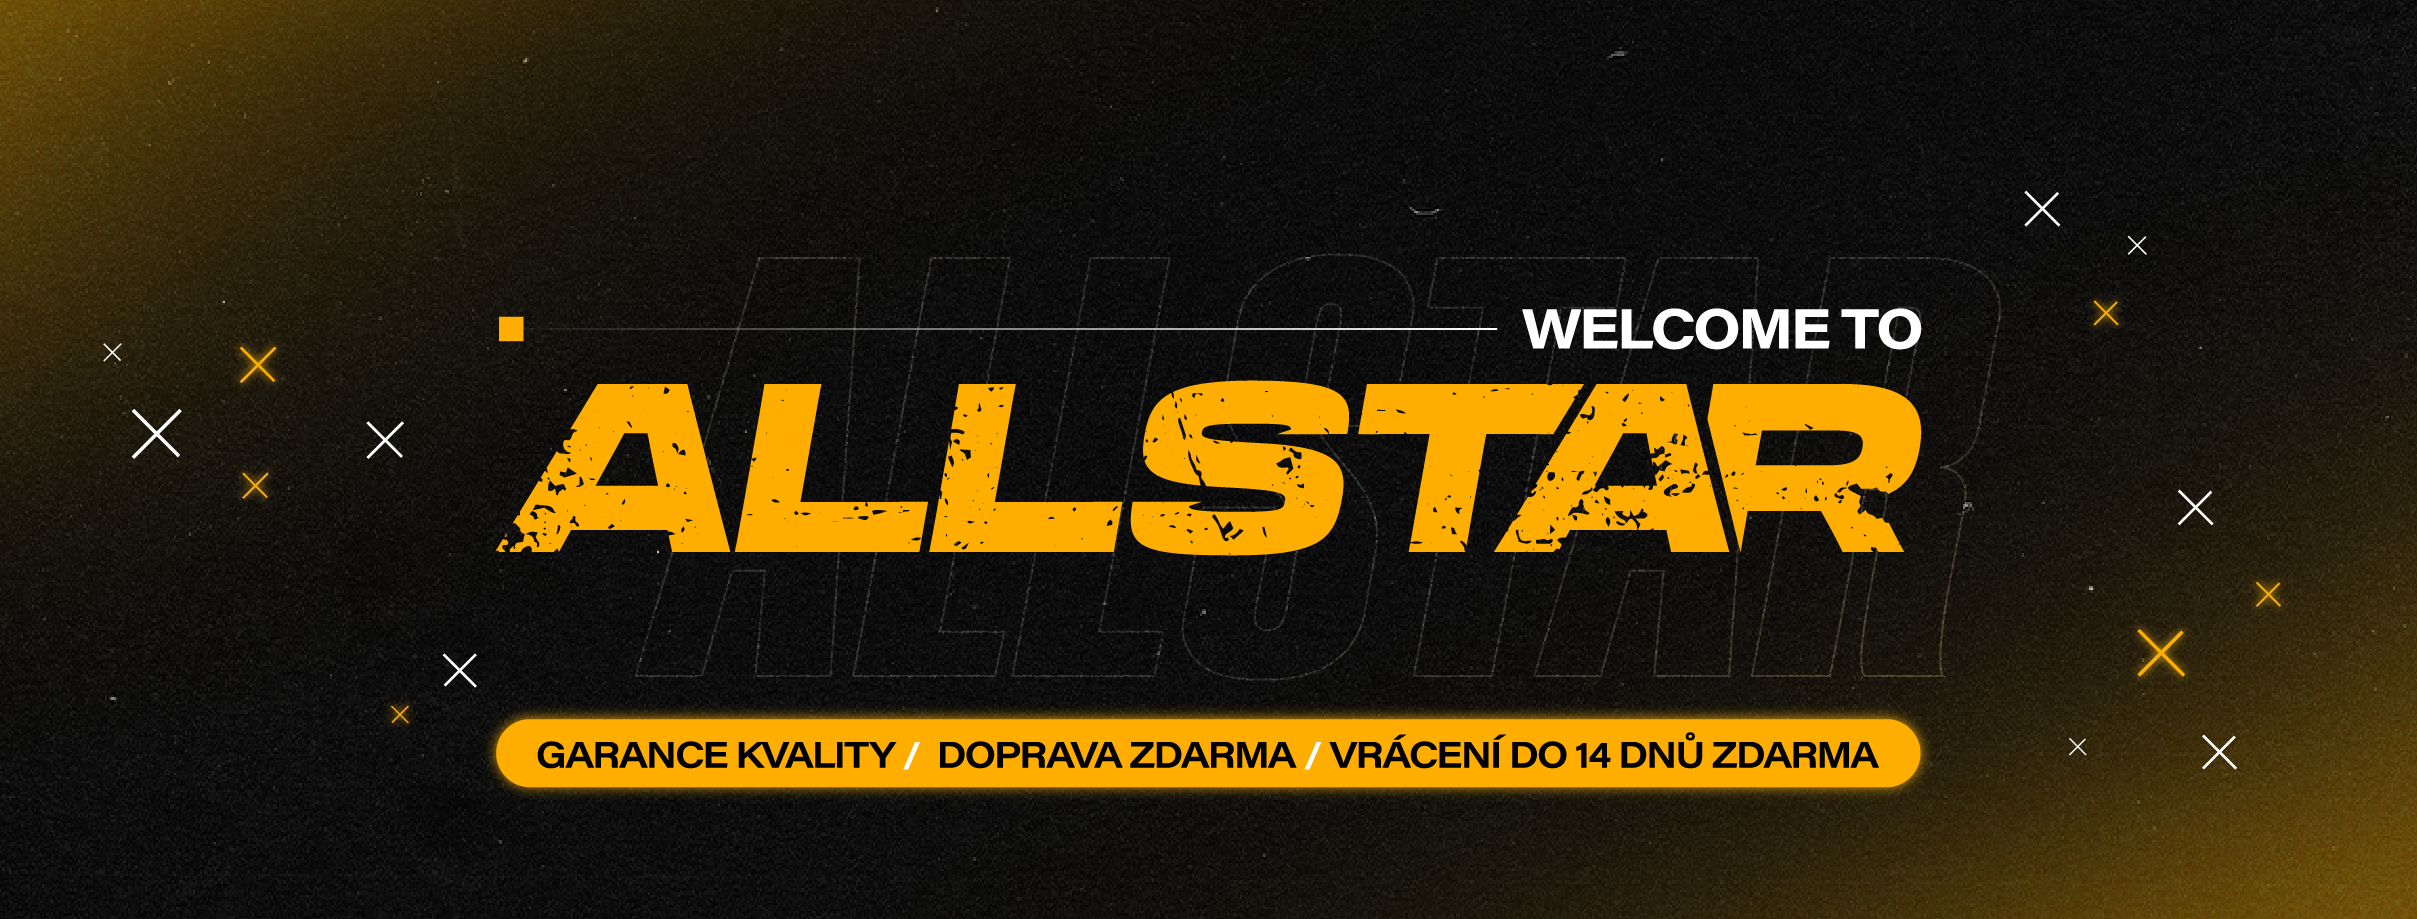 WELCOME TO ALLSTAR